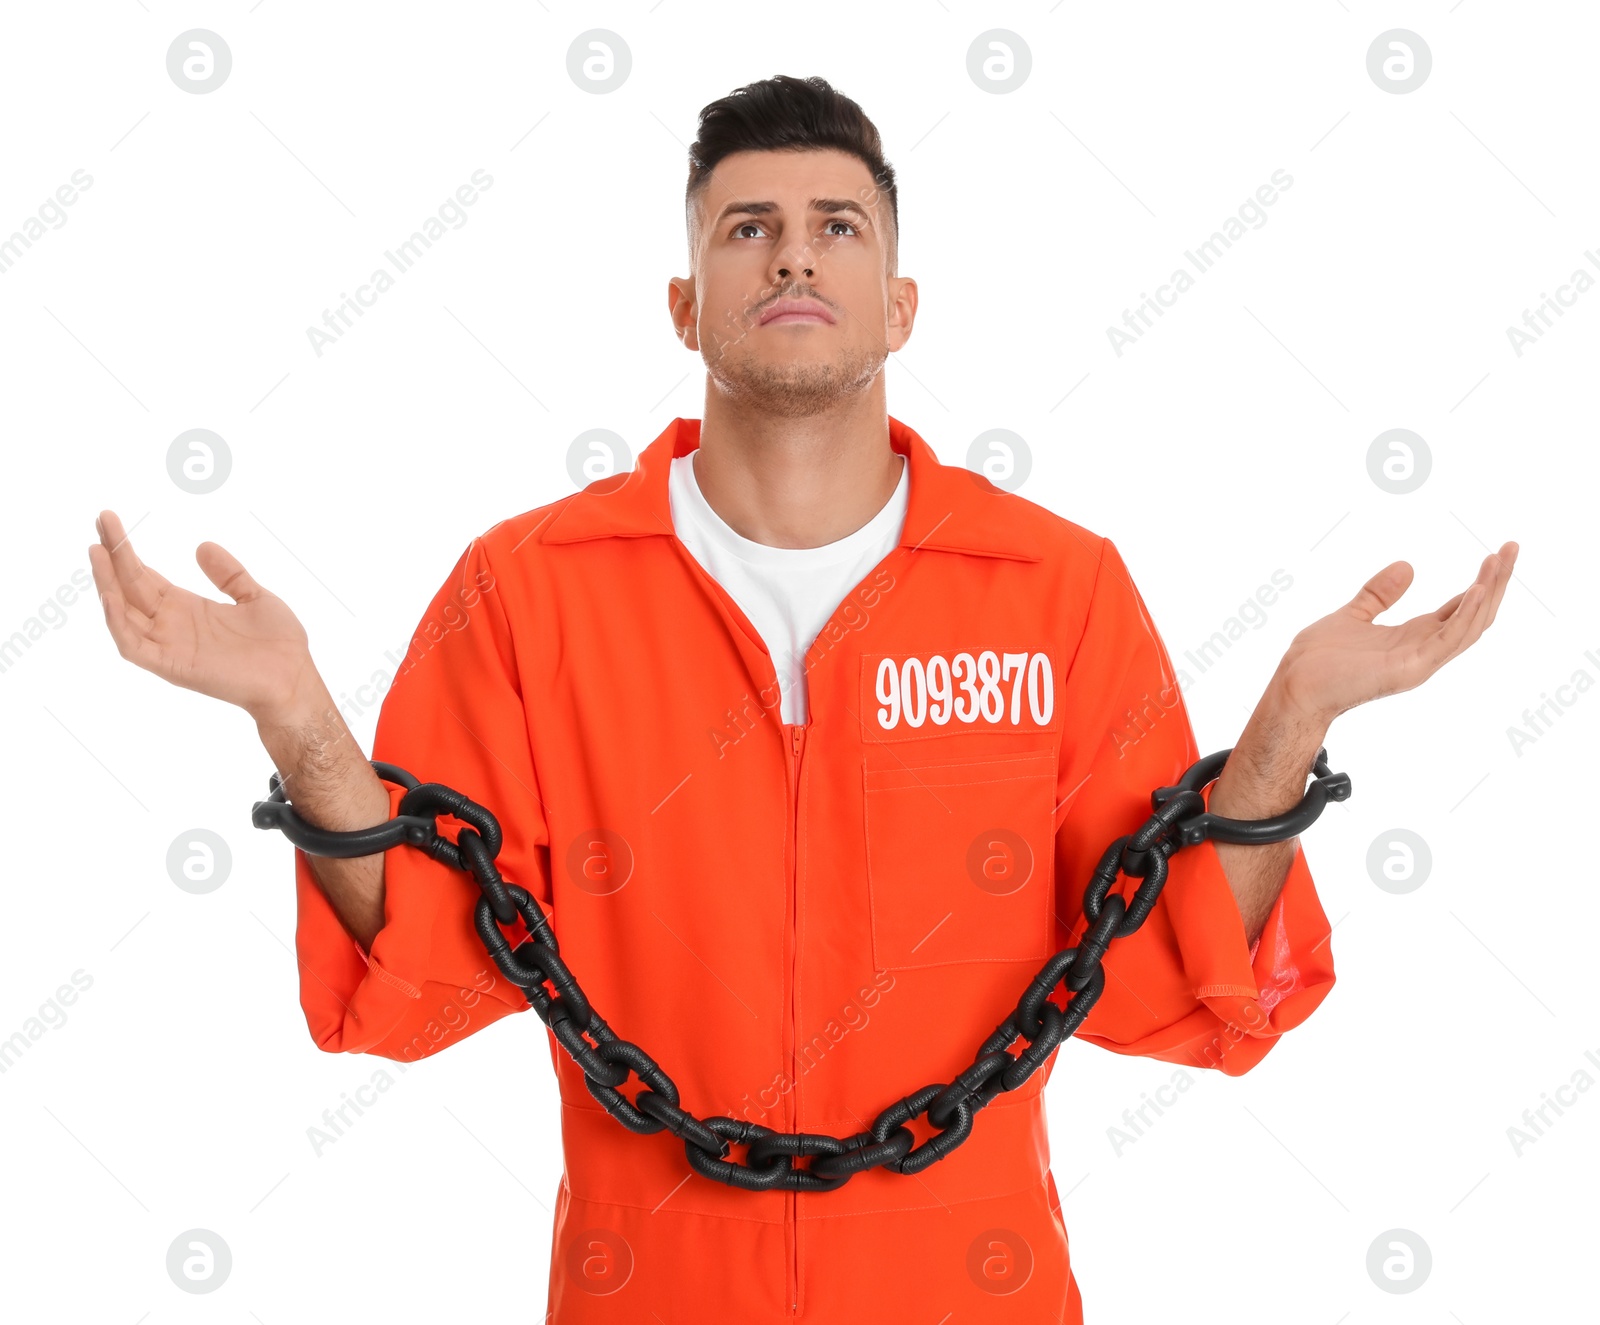 Photo of Prisoner in orange jumpsuit with chained hands on white background